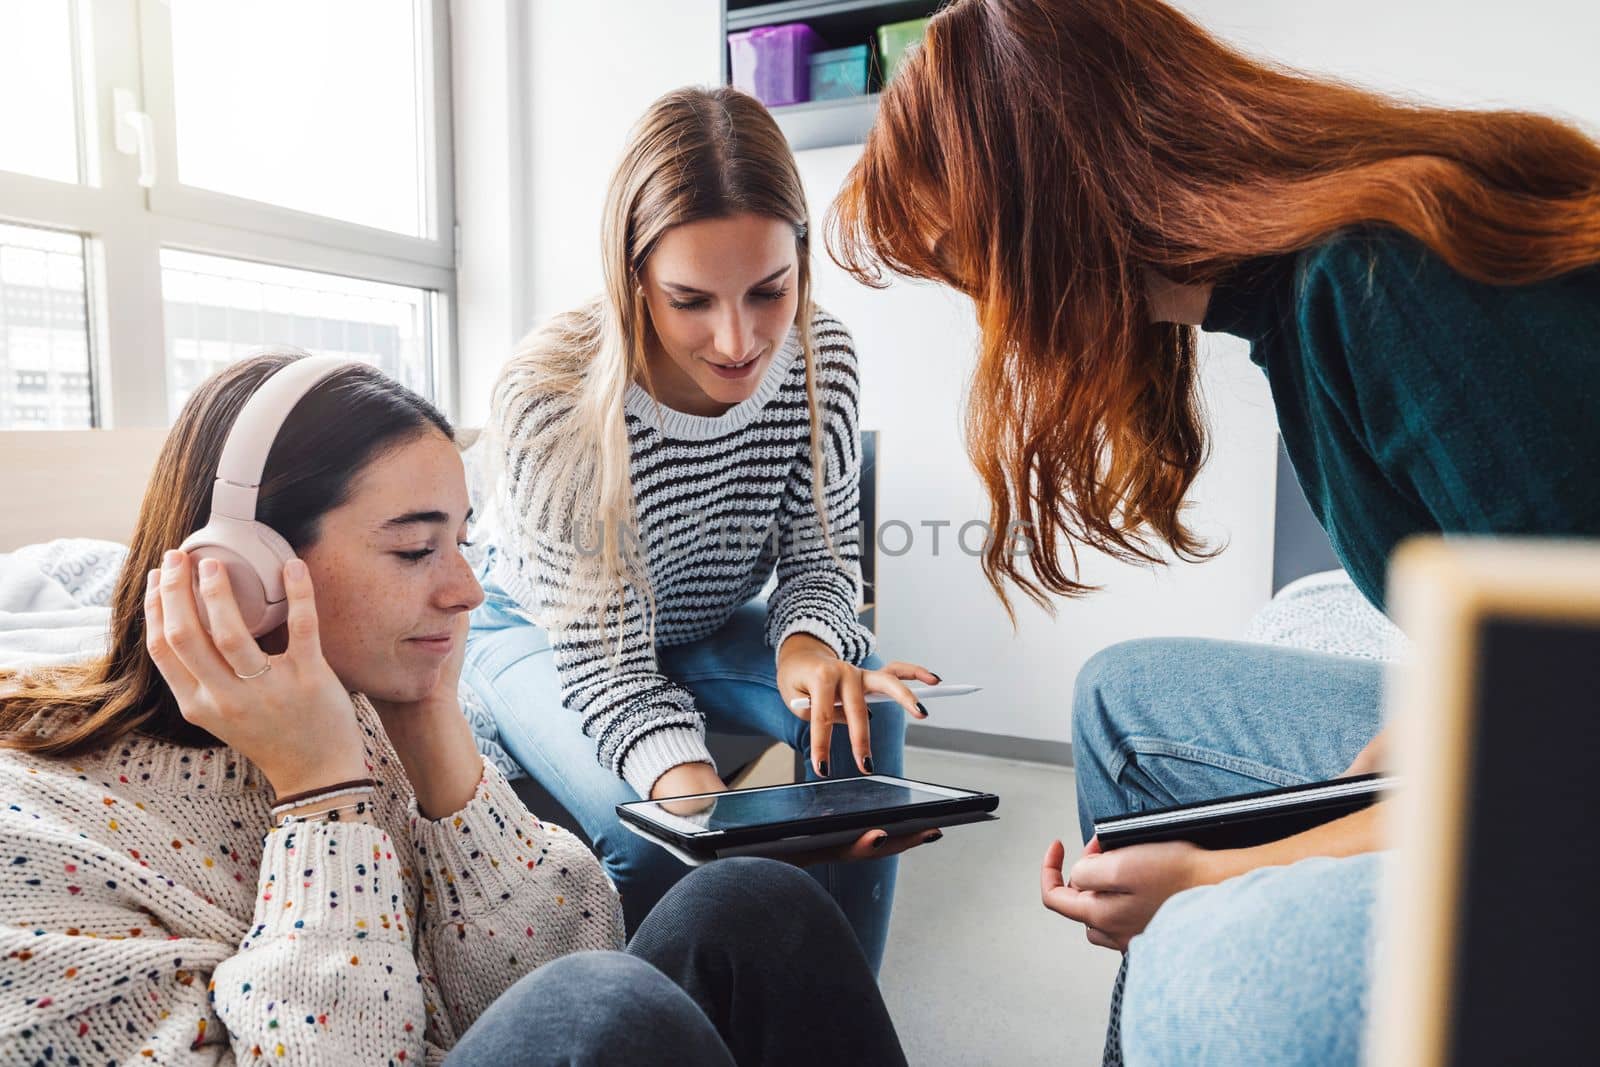 Three female students spending their free time together in their dorm room by VisualProductions